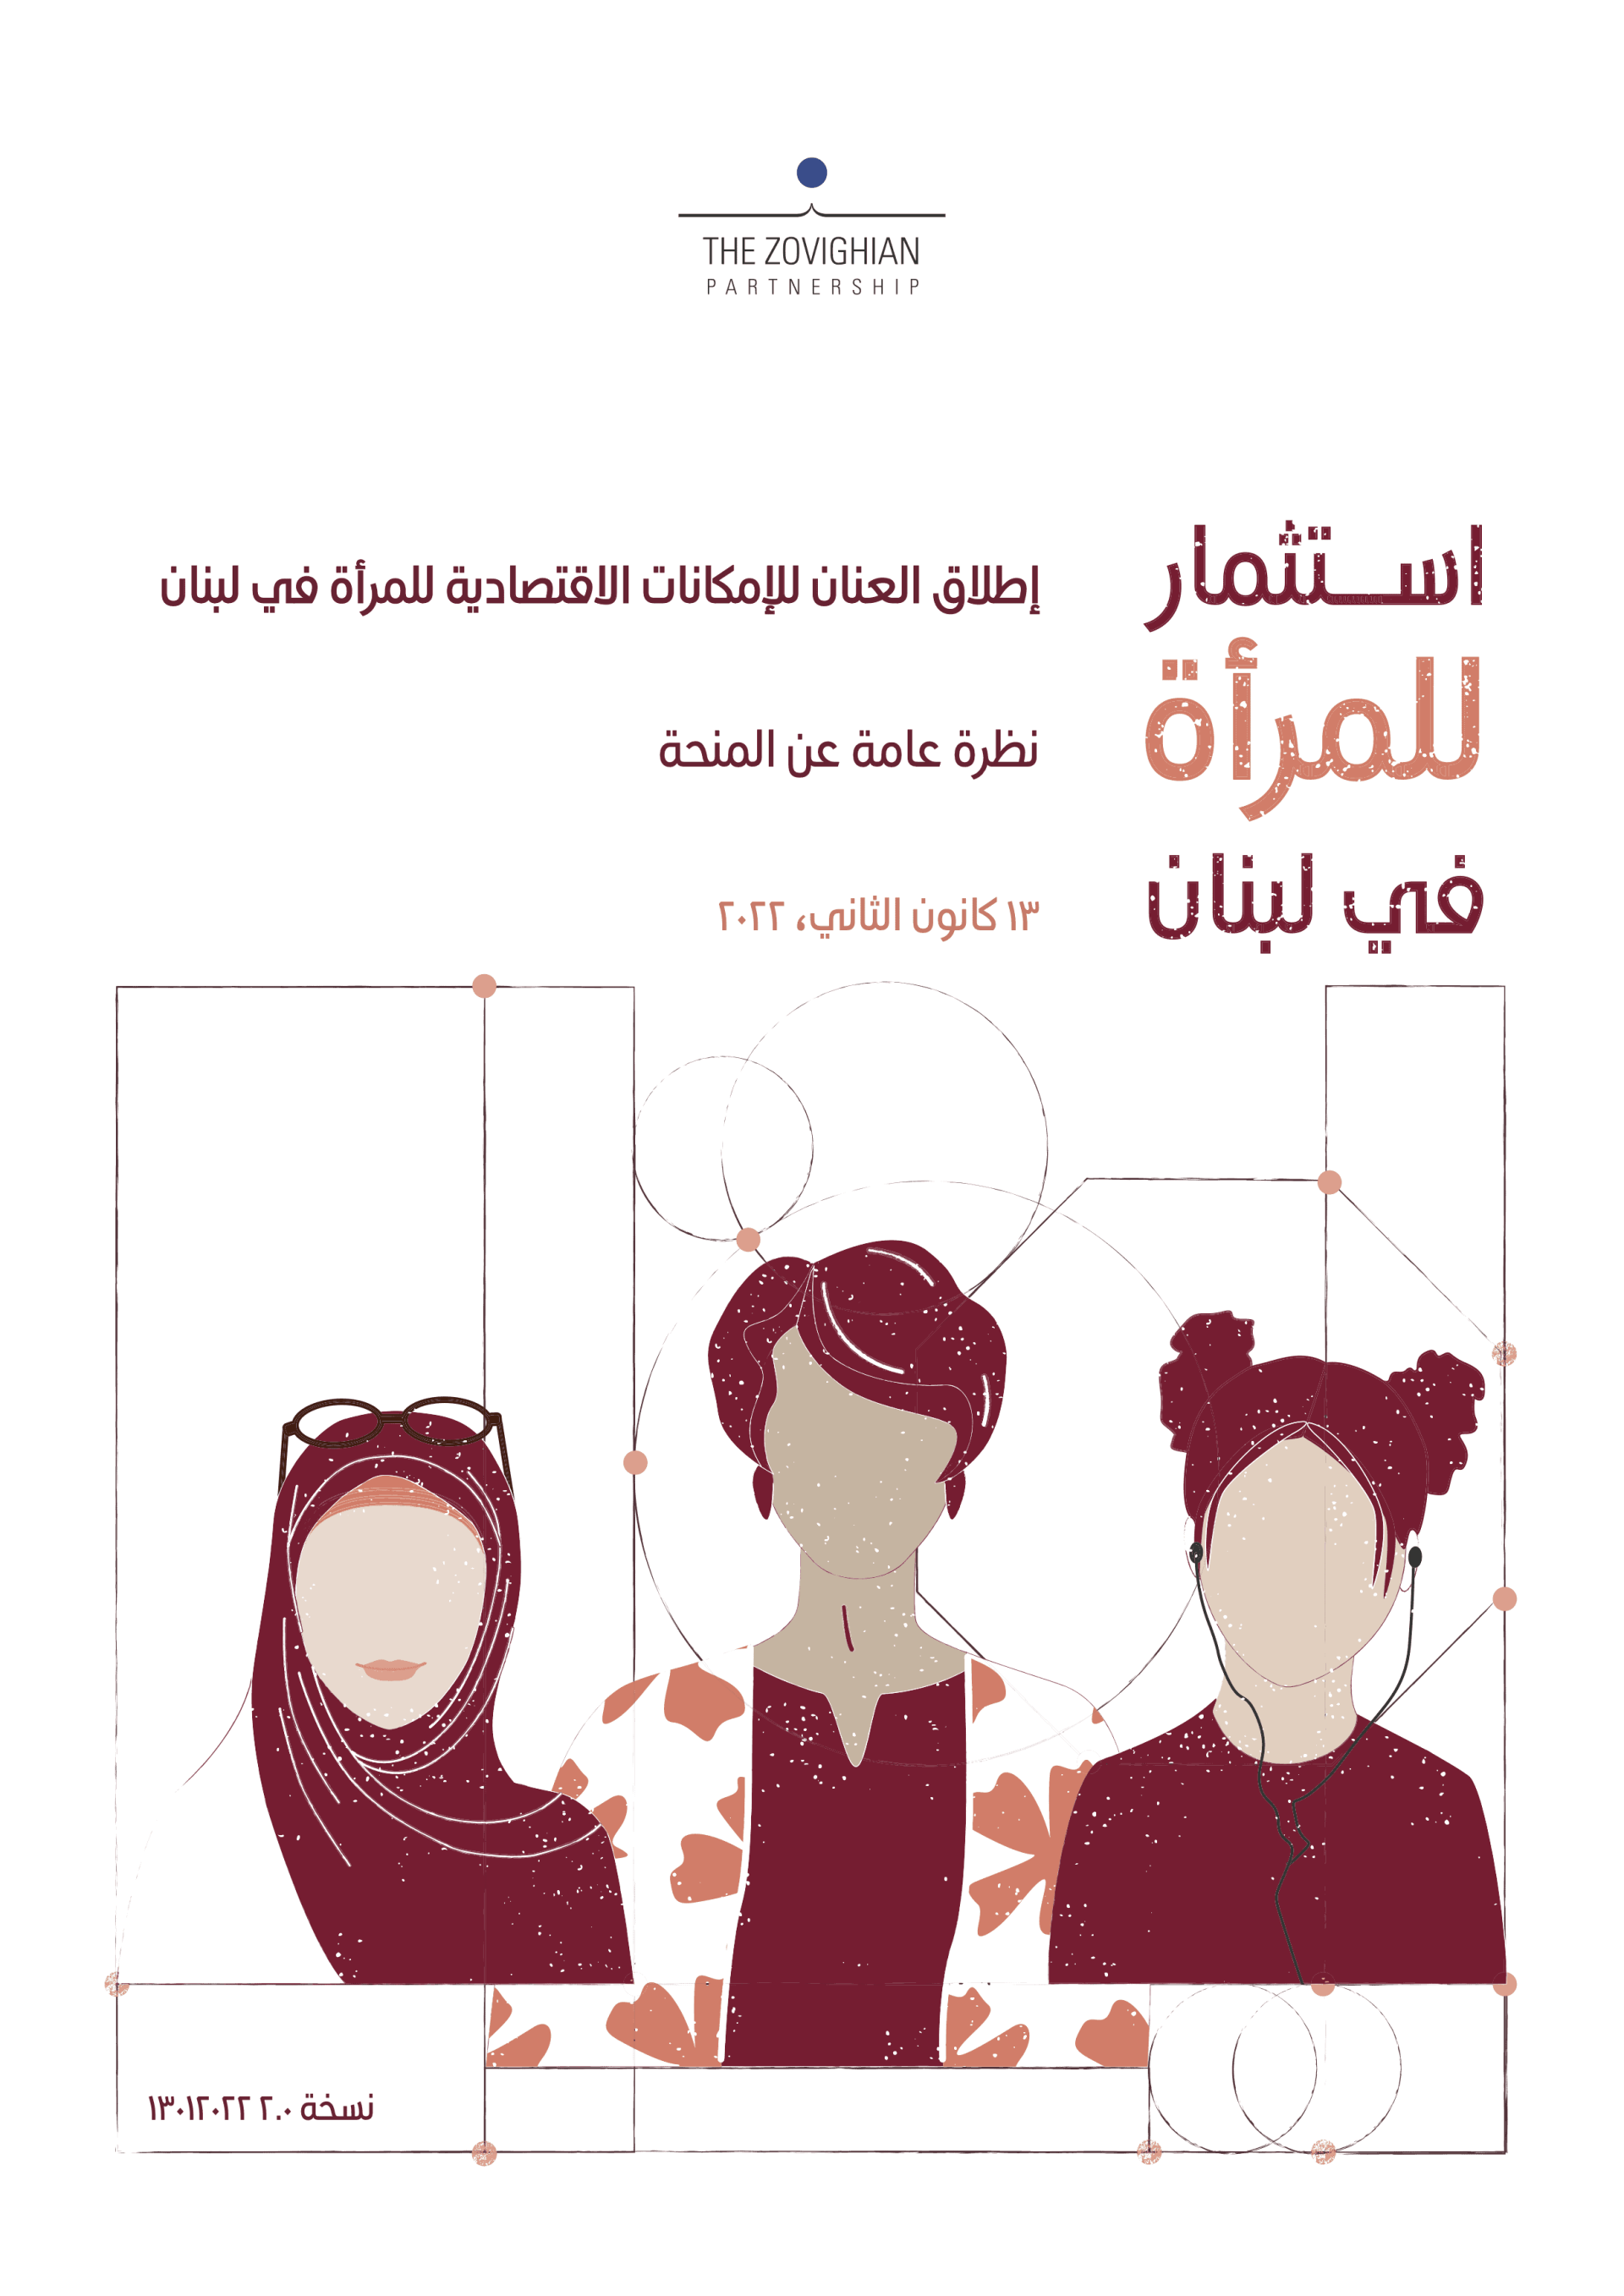 Illustration of three women from different backgrounds during Cycle 2 Grant